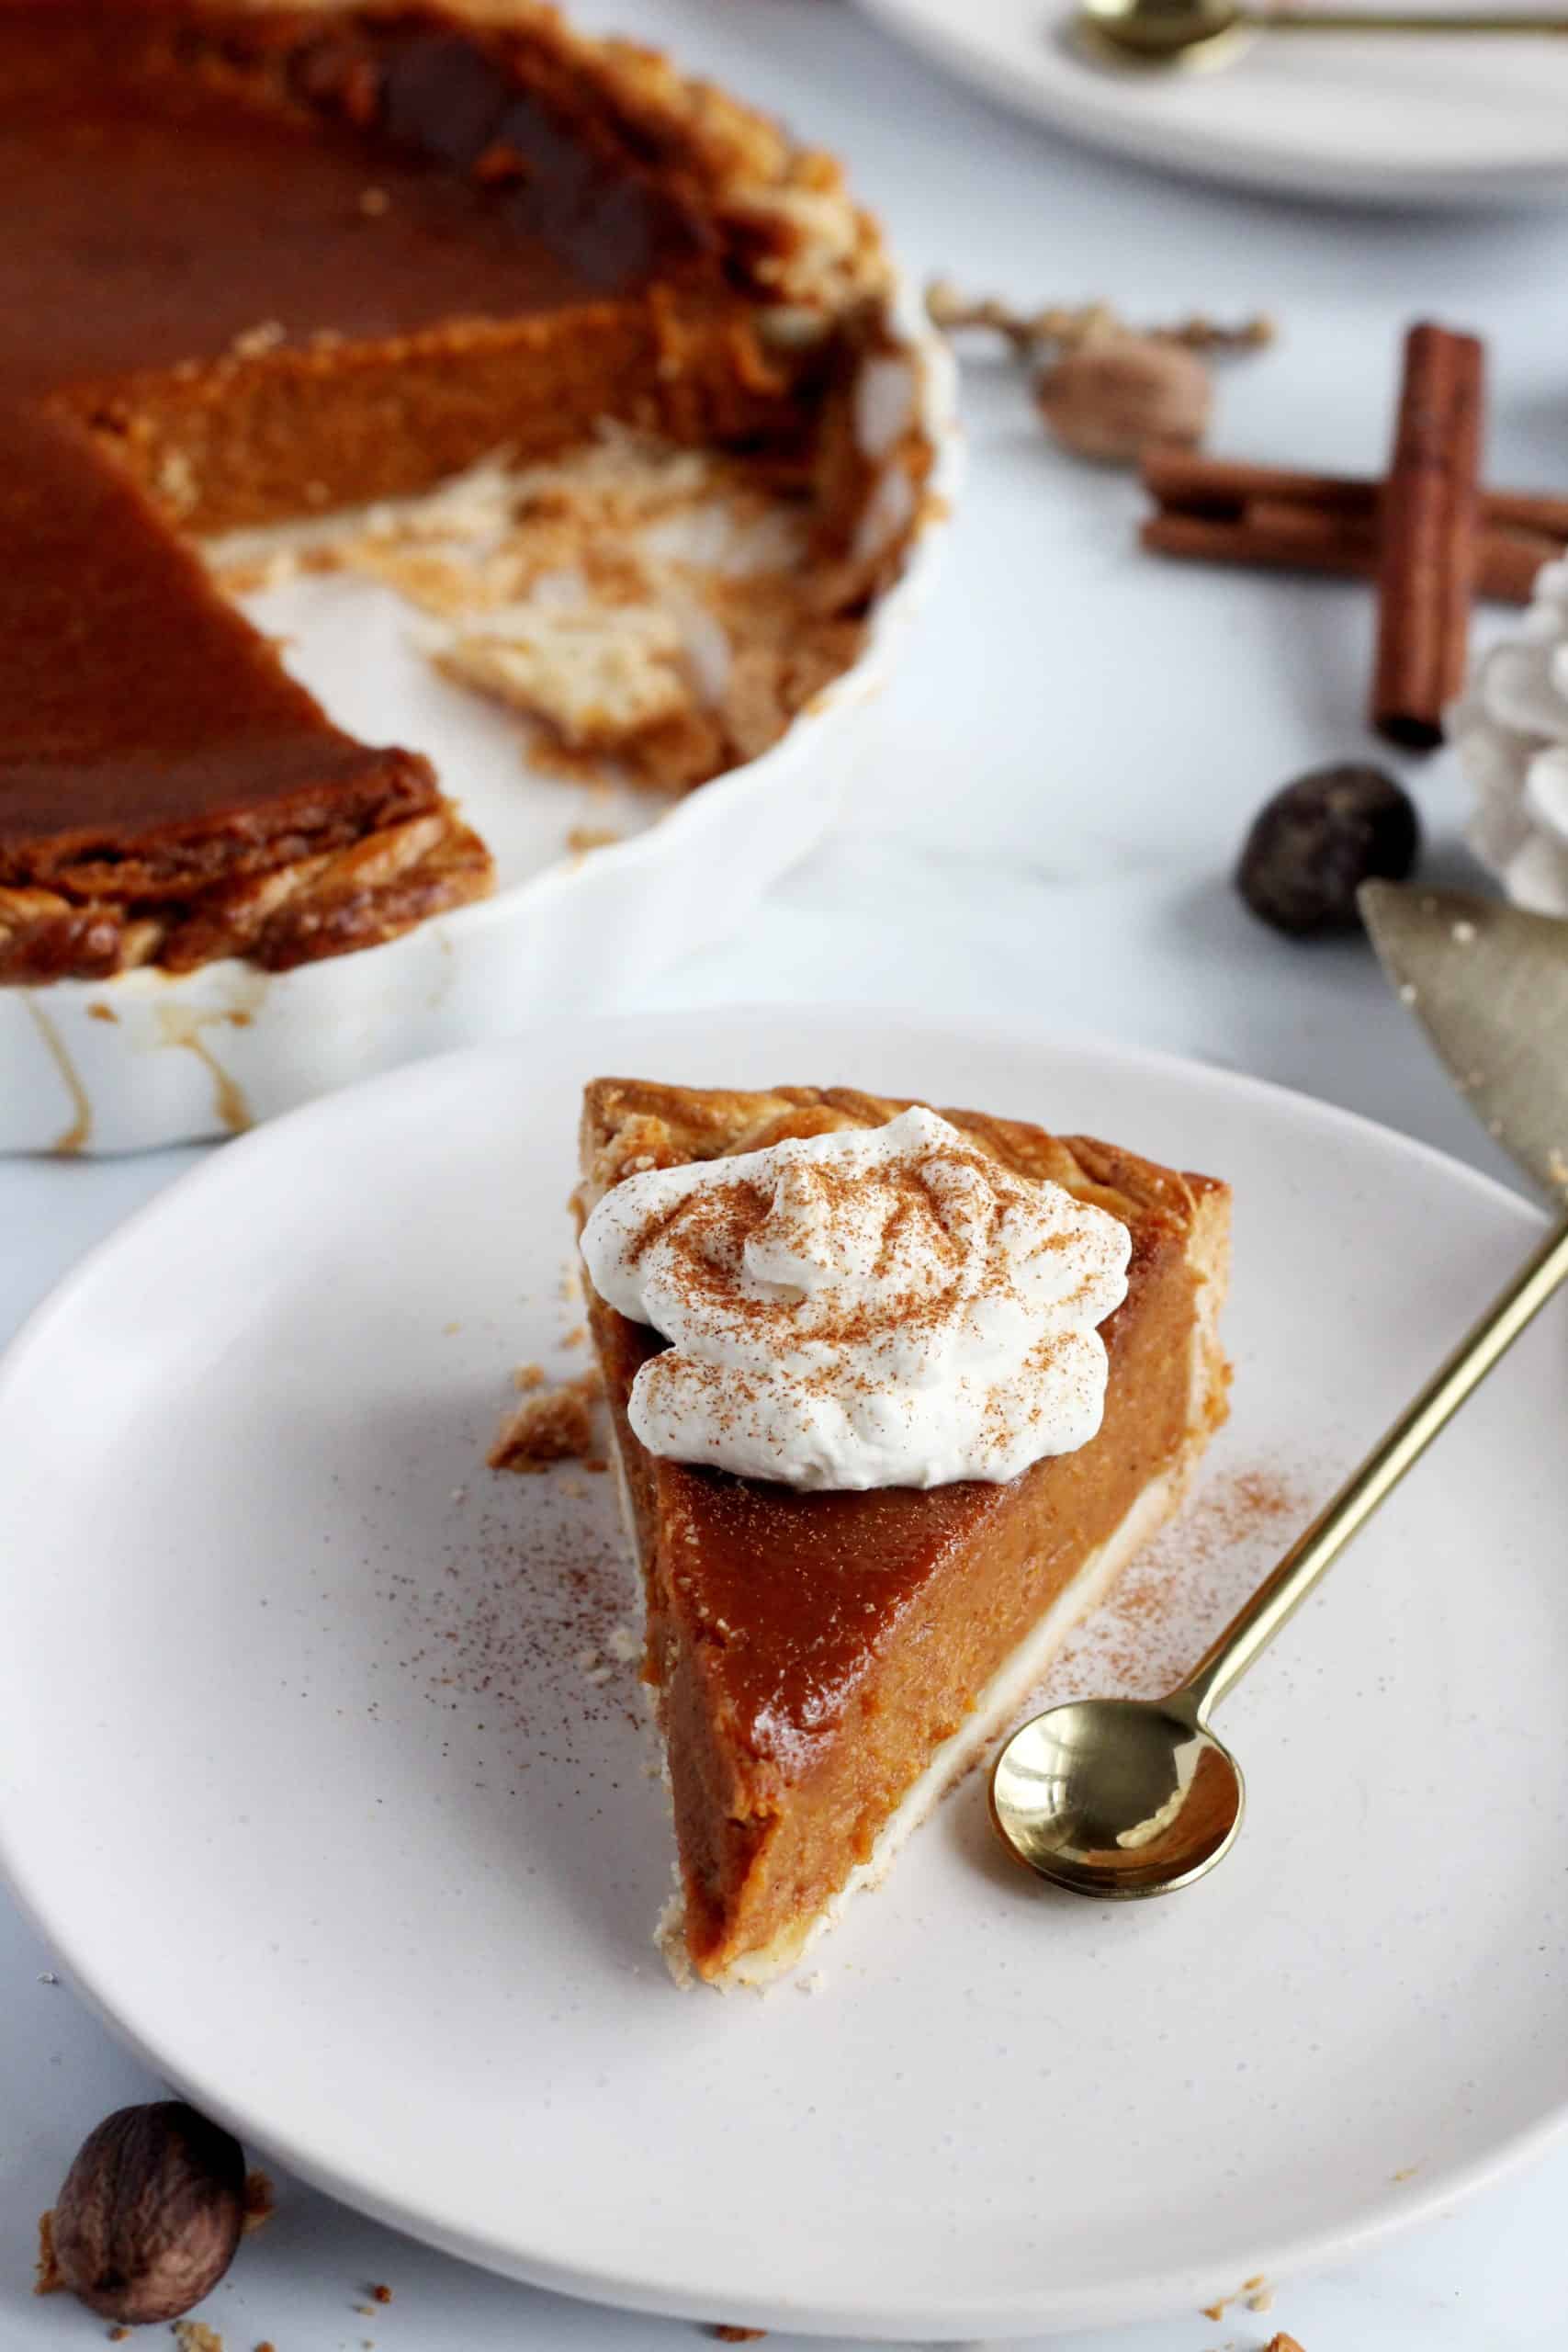 pumpkin pie with whipped cream on top dollop on top served on white plate